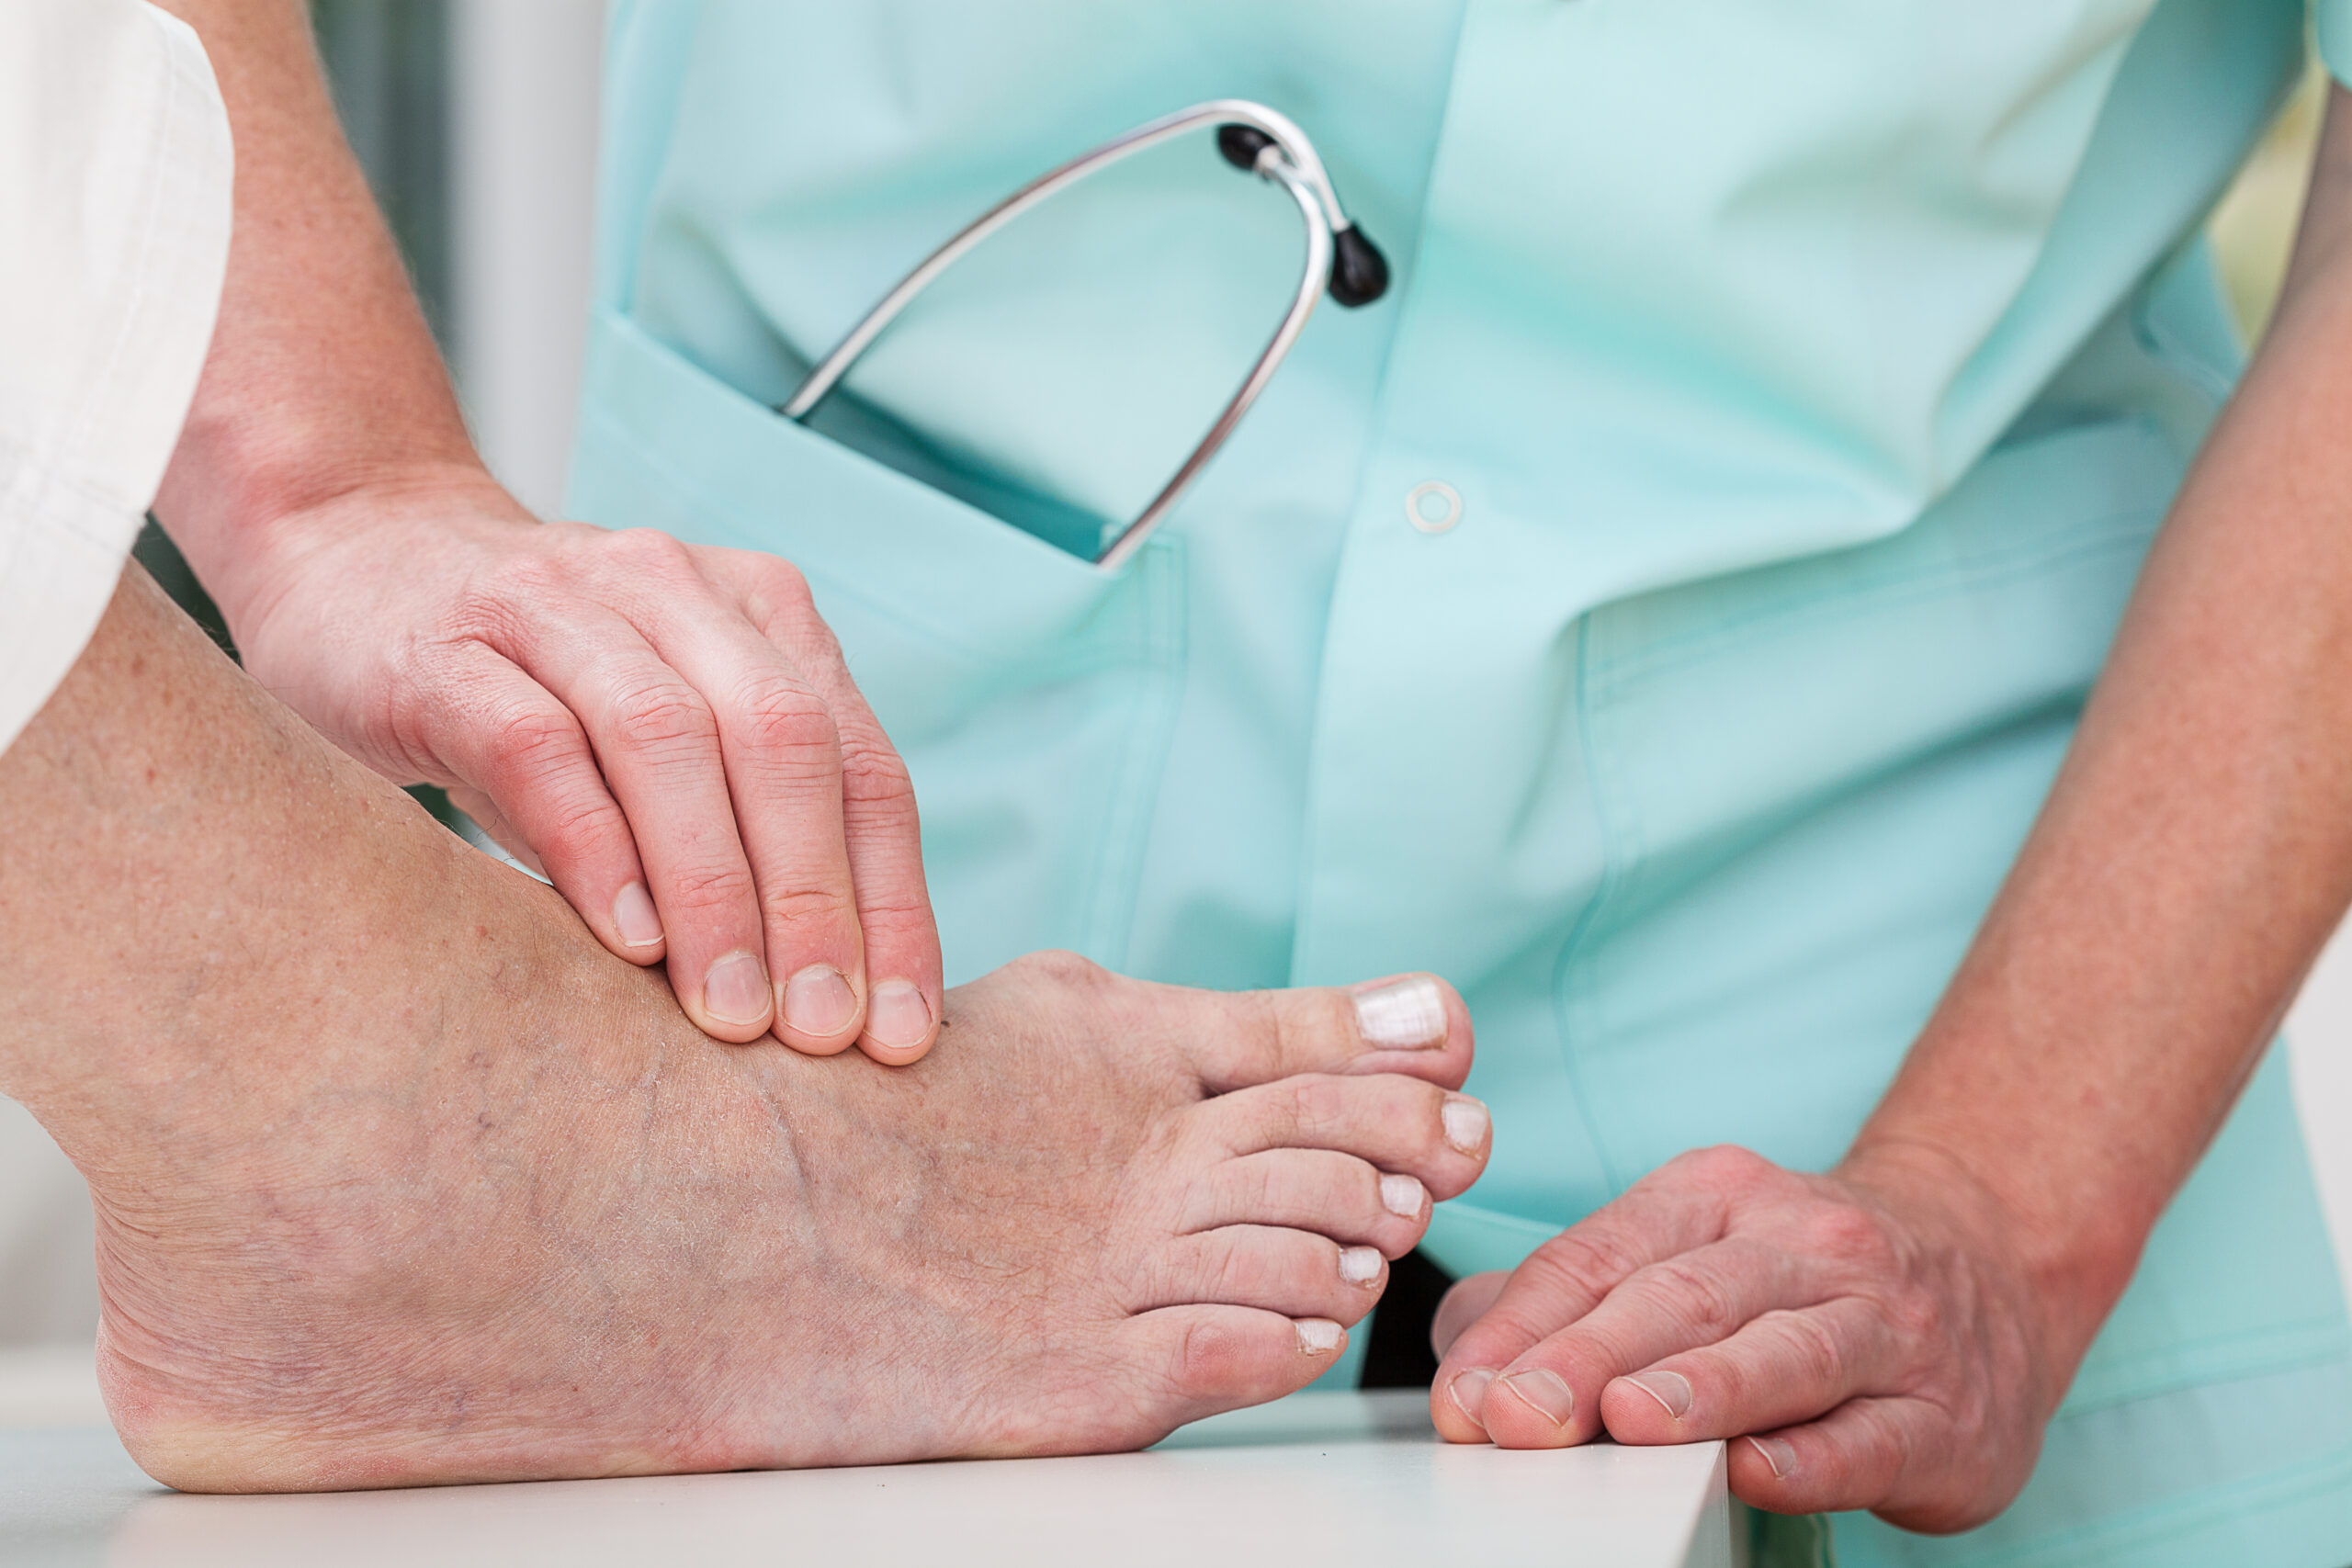 is bunion surgery covered by insurance